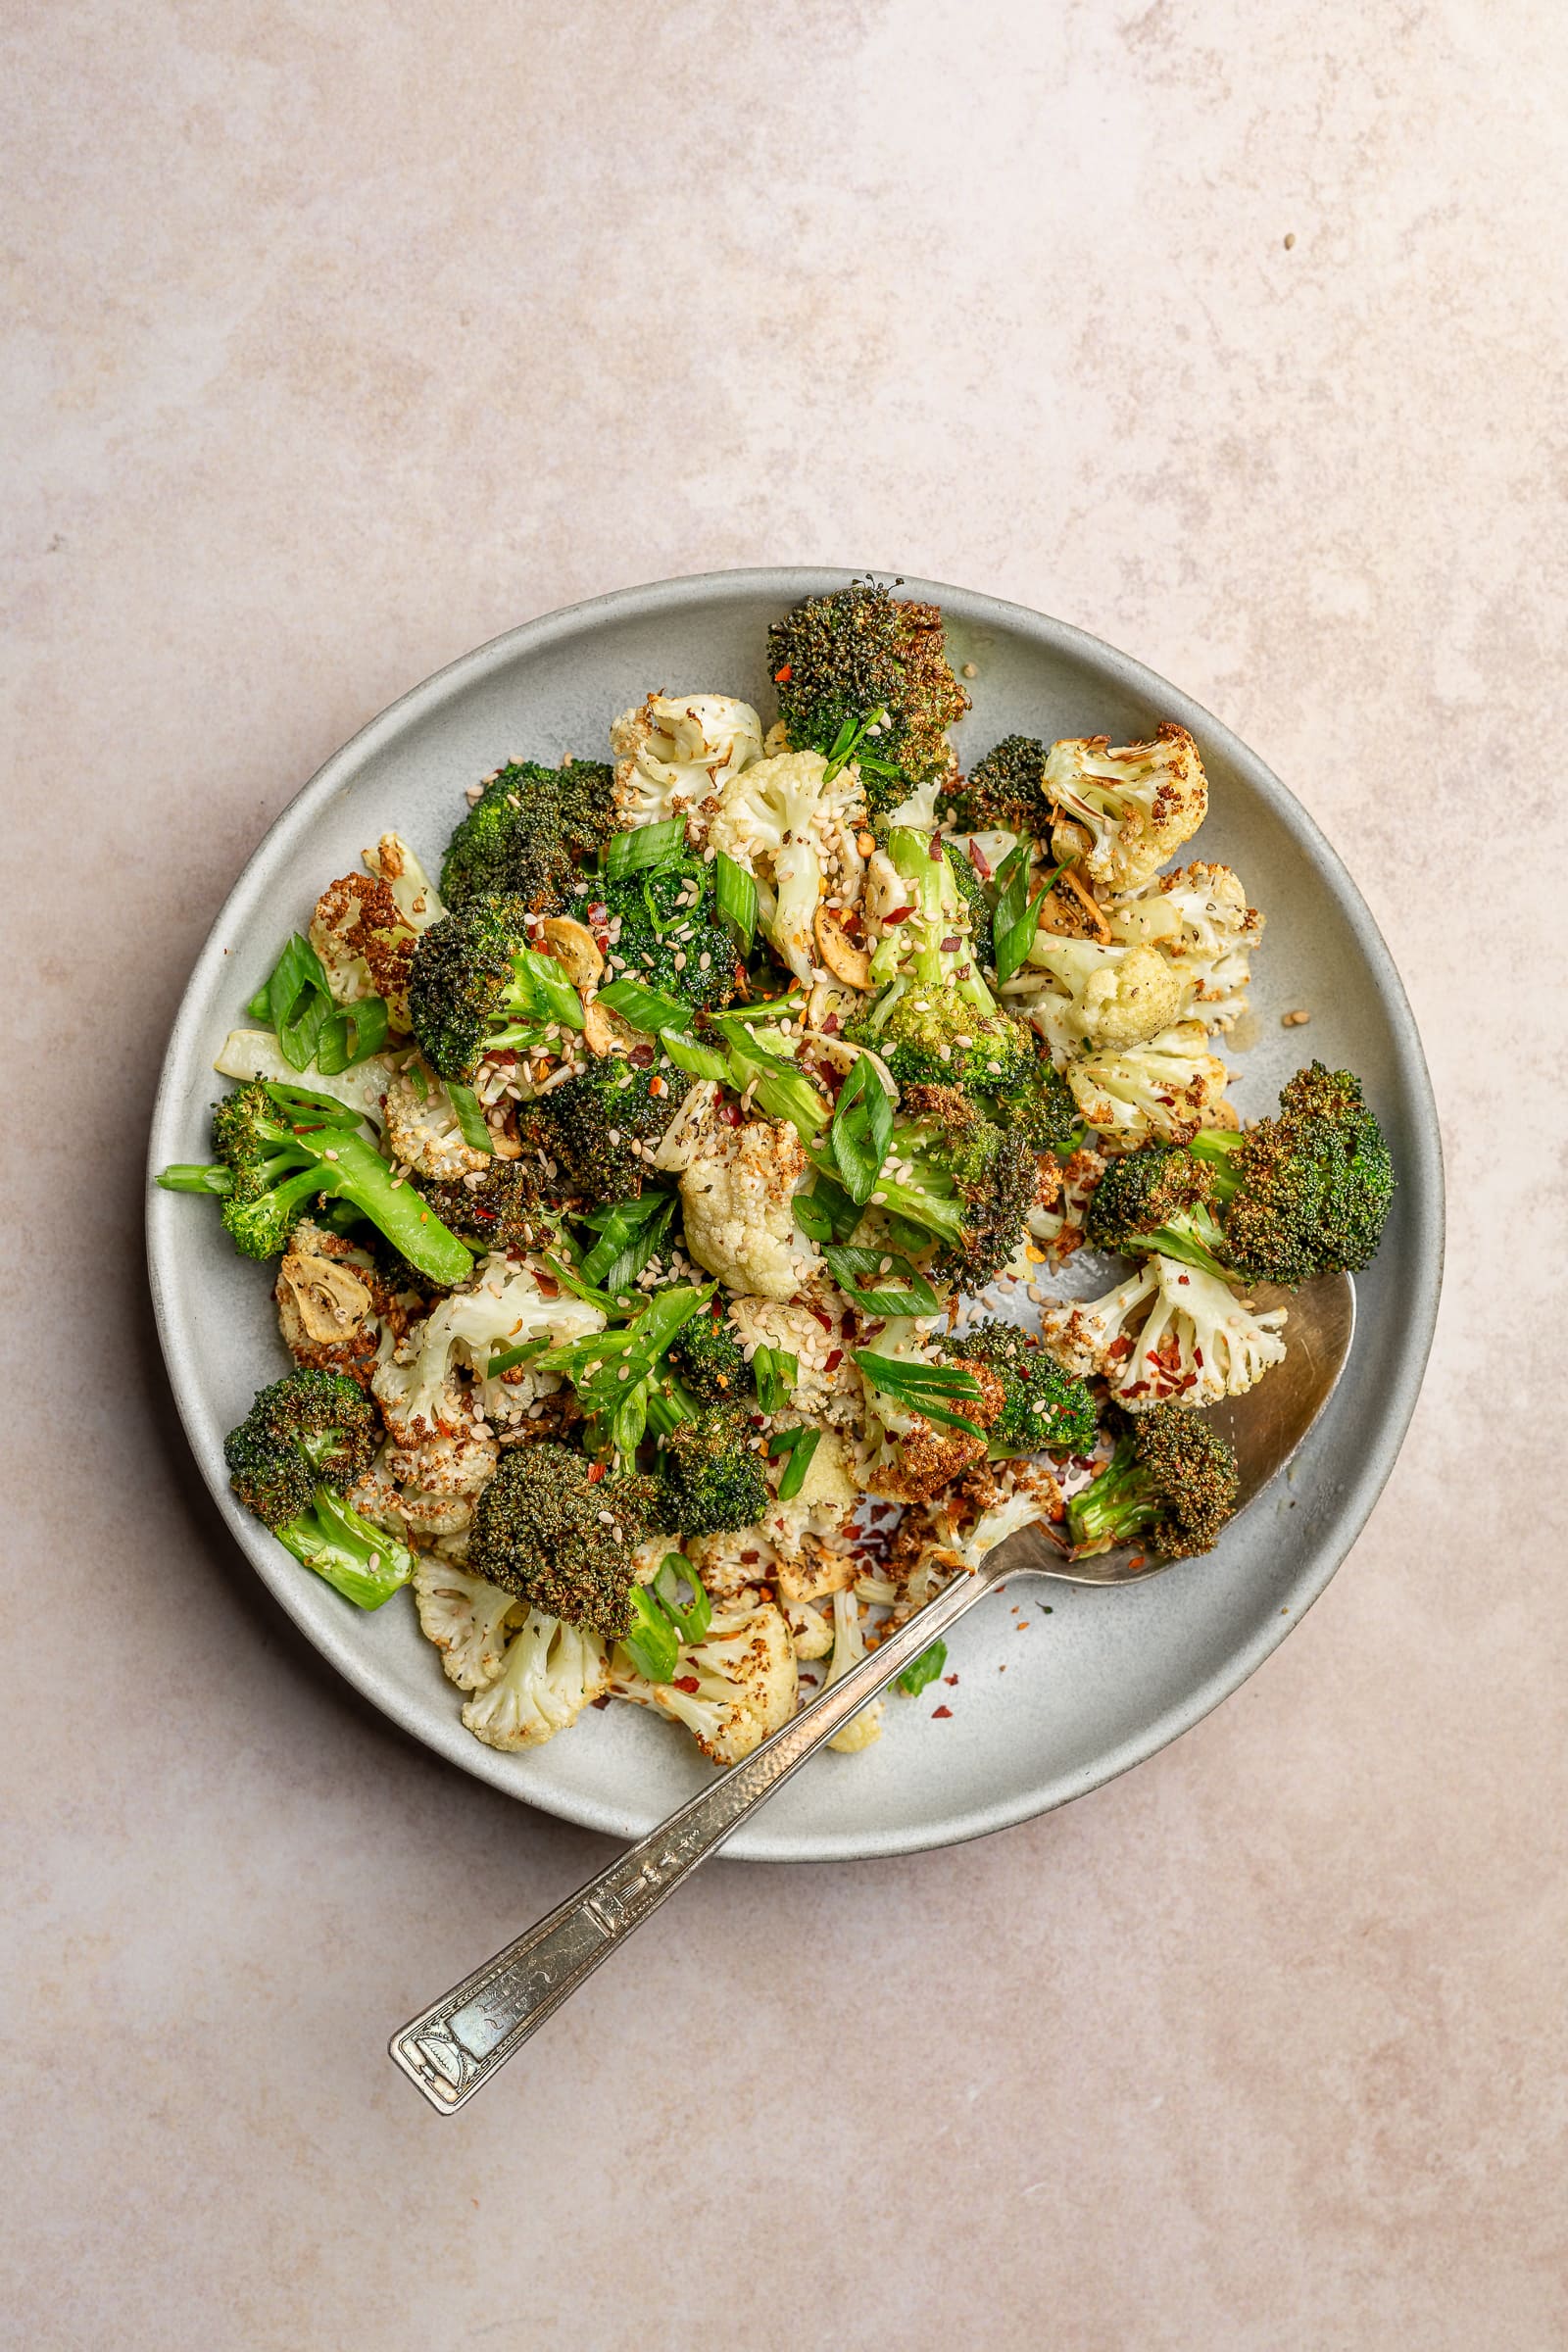 Close up of crispy broccoli and cauliflower with sesame seeds, chili flakes, and green onions on a serving plate.